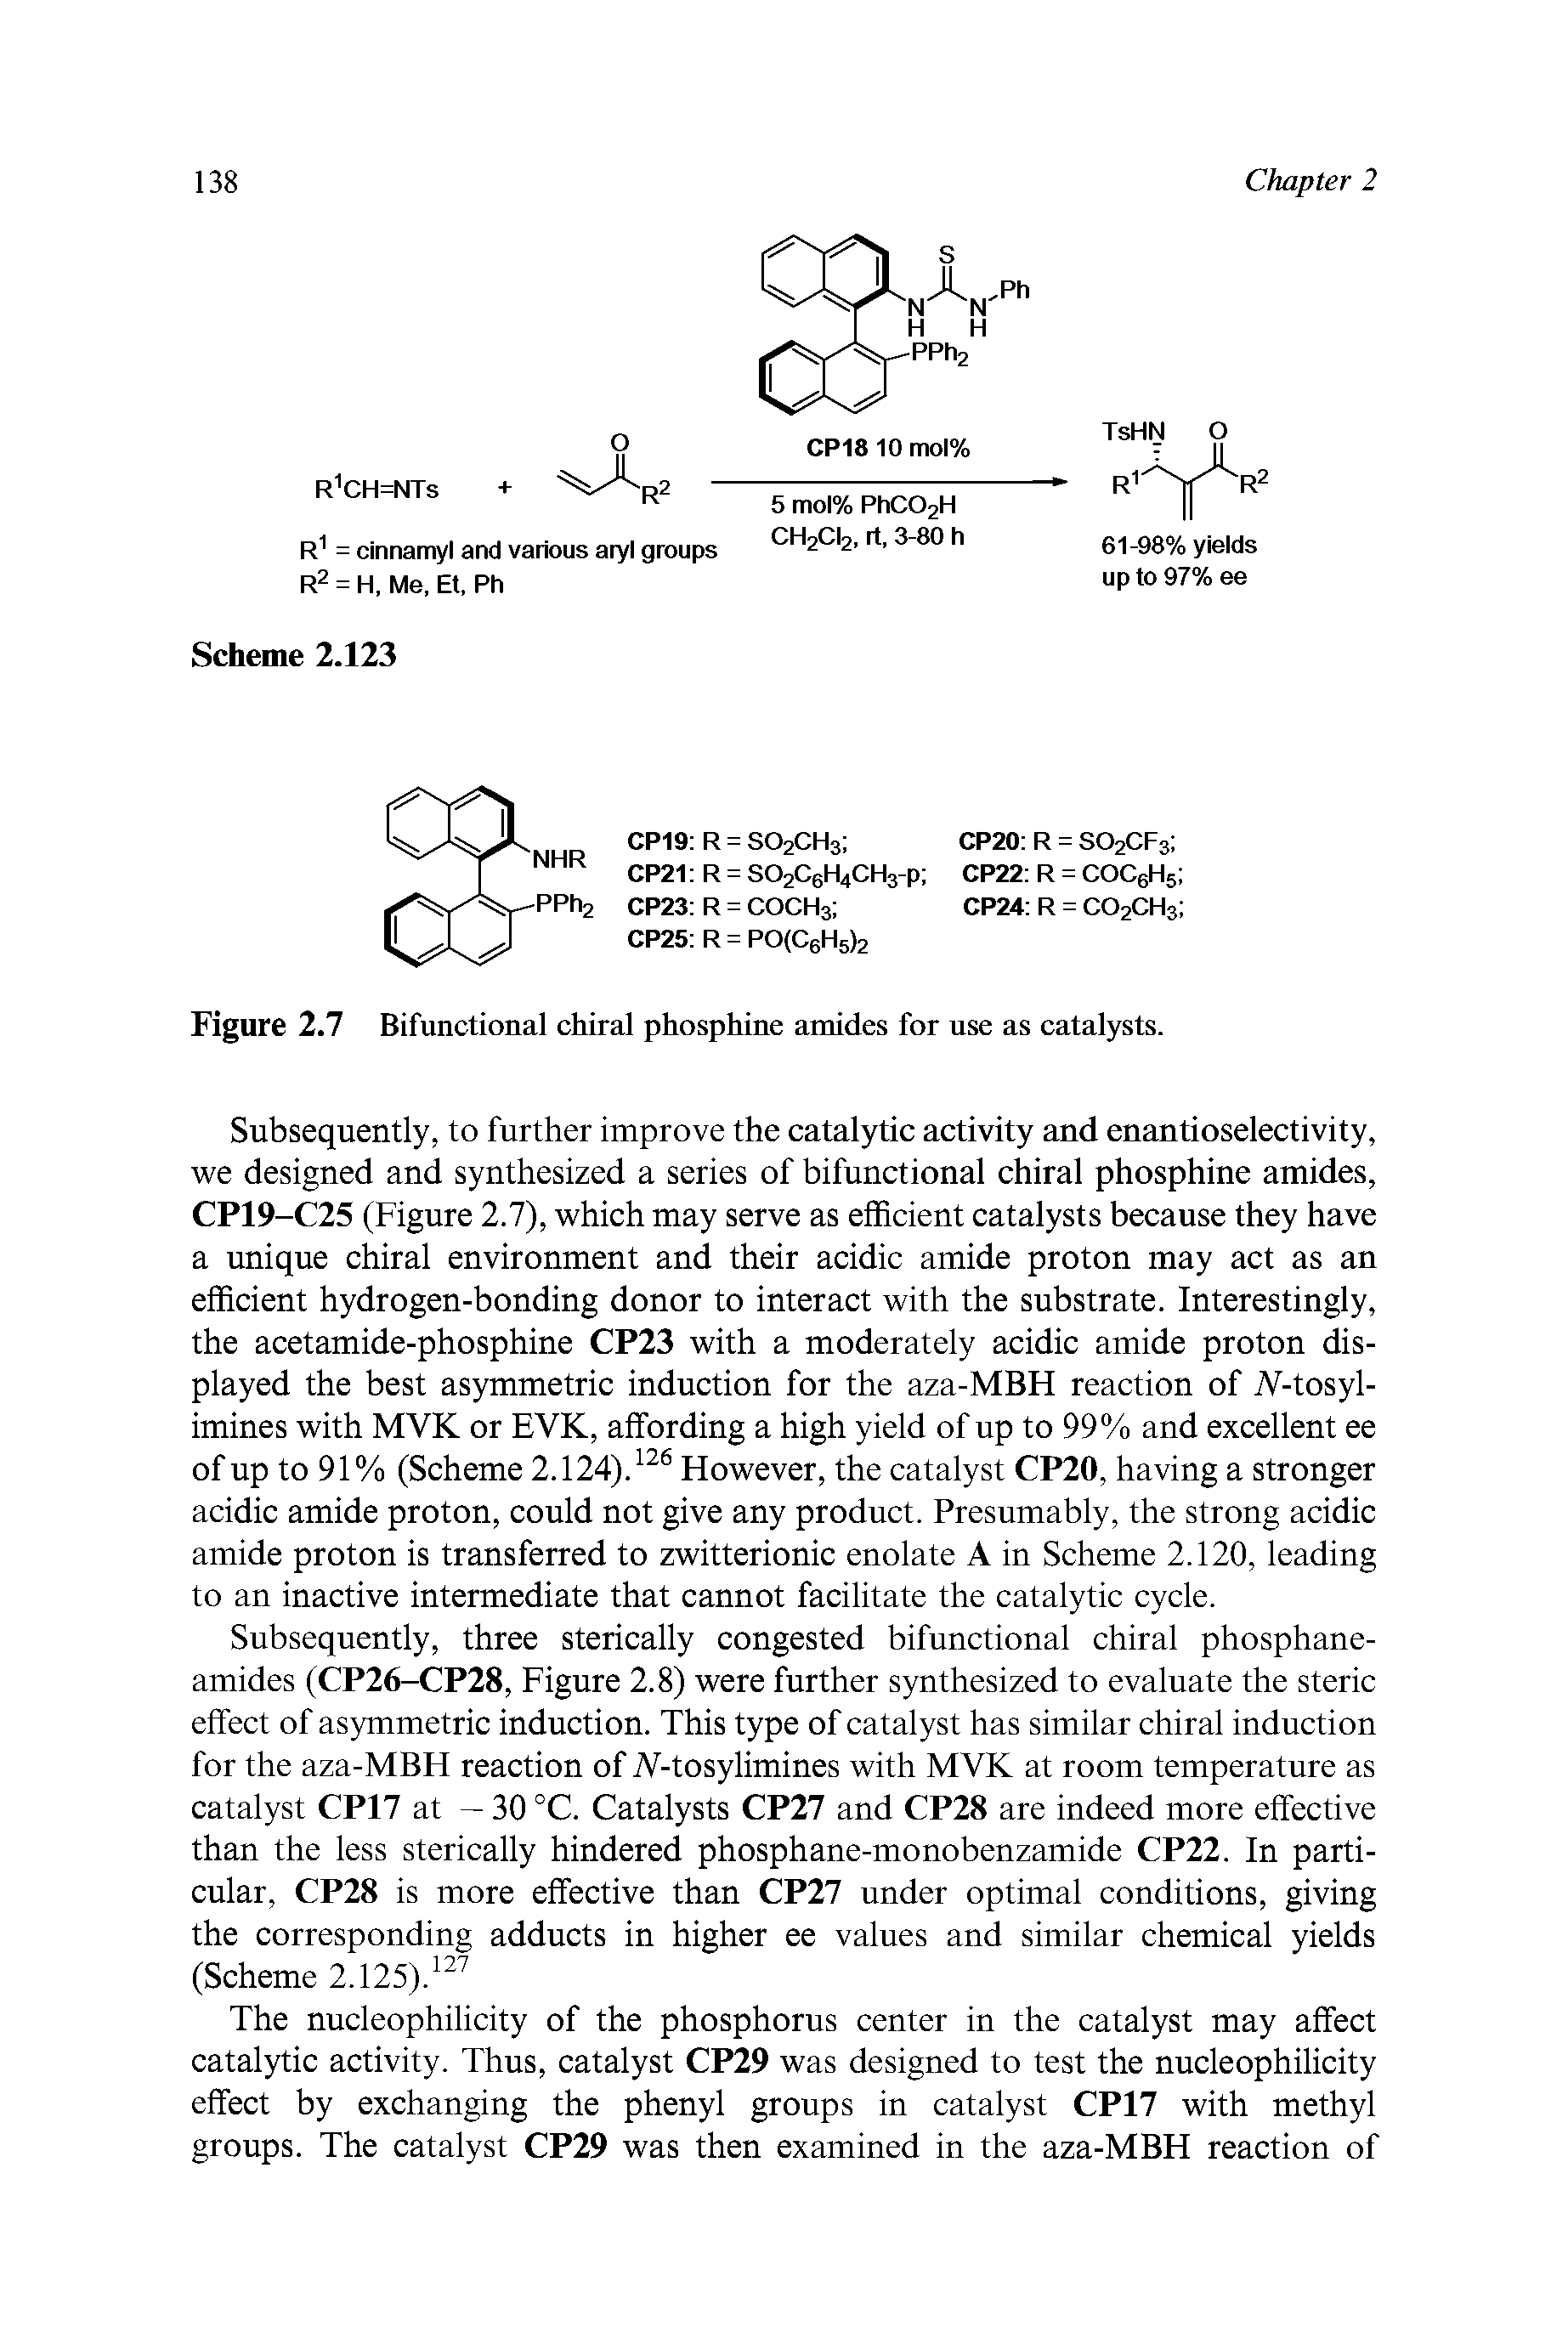 Figure 2.7 Bifunctional chiral phosphine amides for use as catalysts.